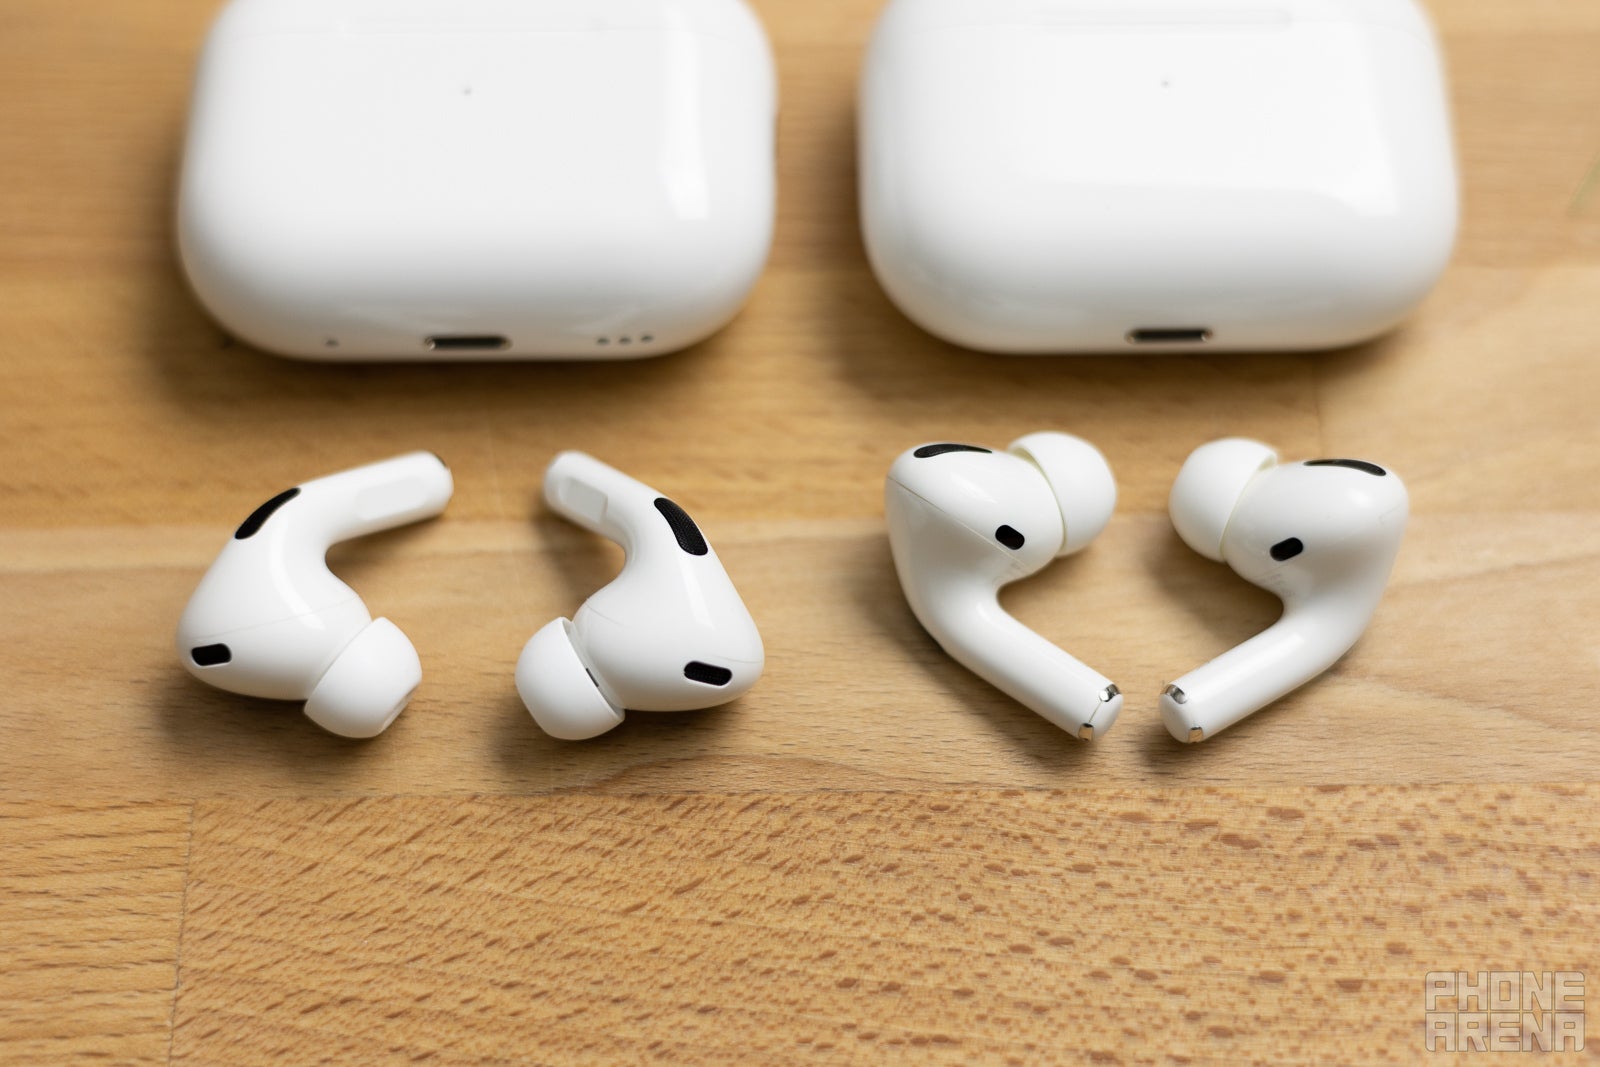 AirPods Pro 2 vs AirPods Pro comparison: What's different